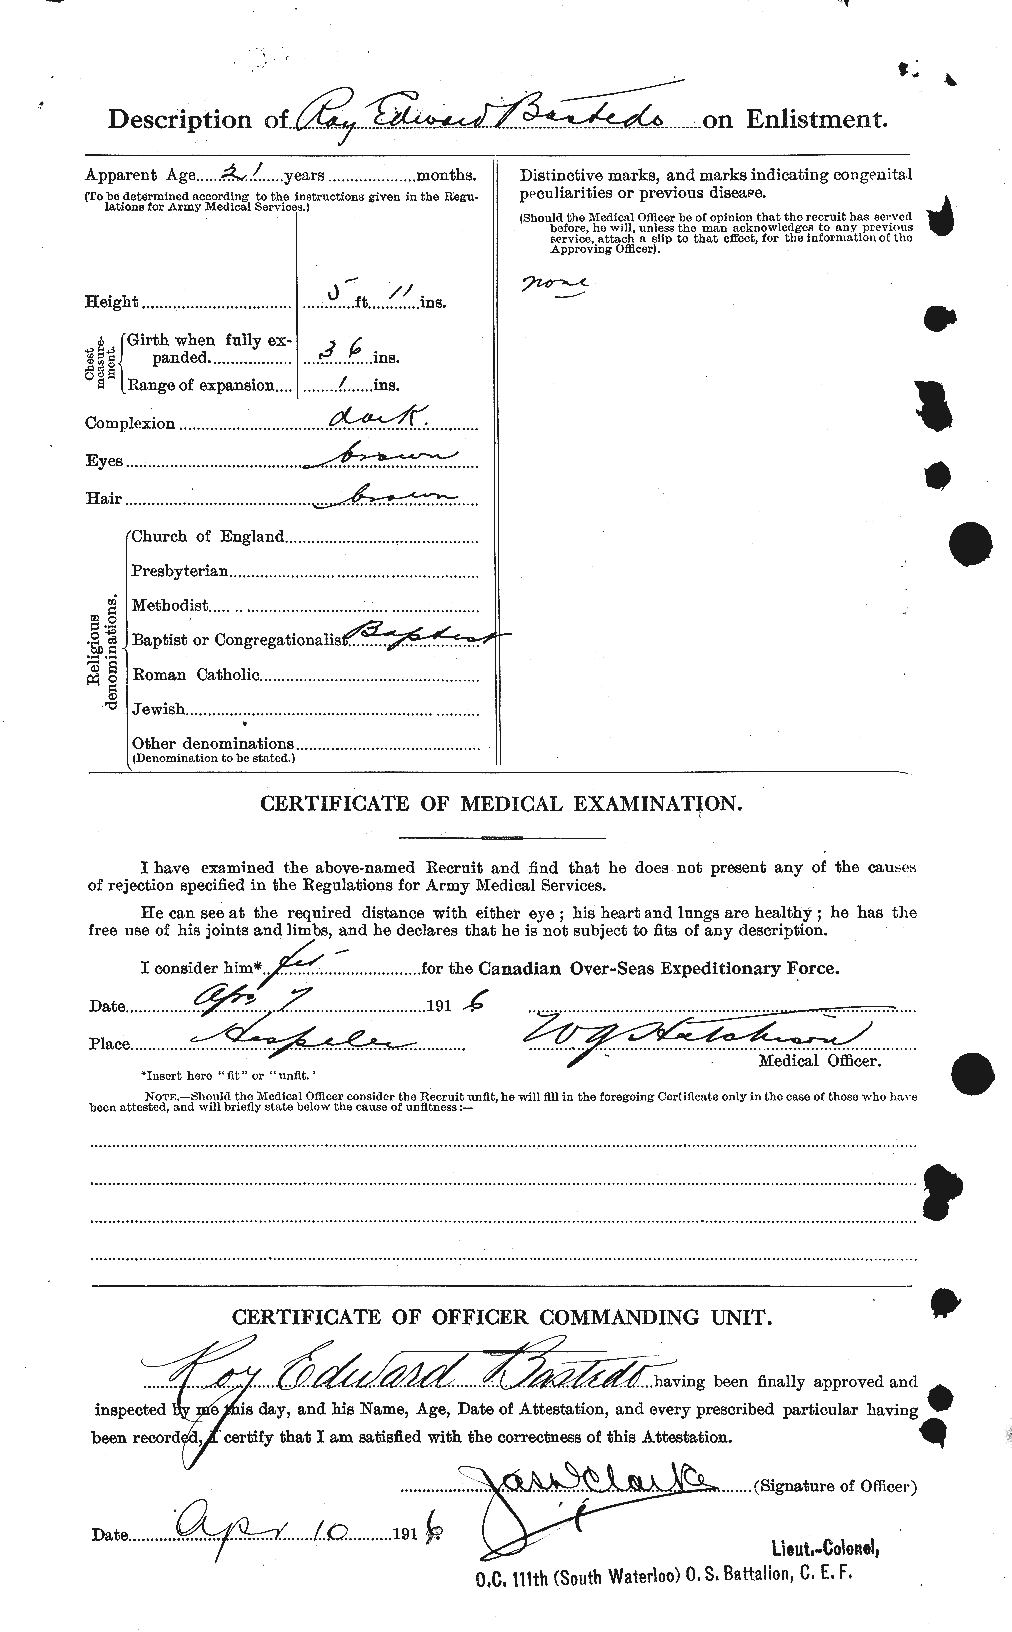 Personnel Records of the First World War - CEF 228264b